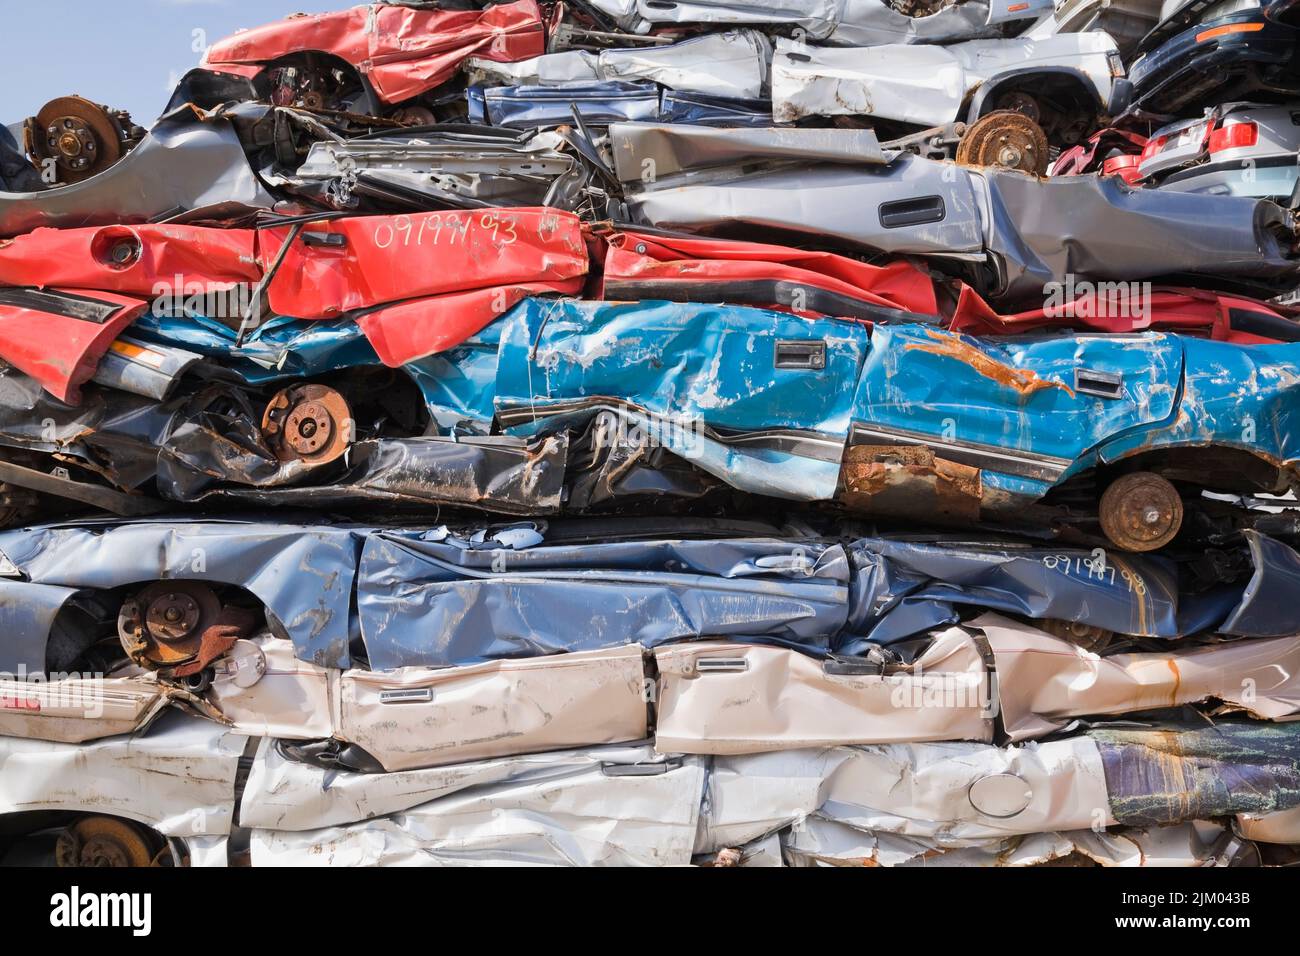 Stacked and crushed discarded automobiles at scrap metal recycling yard. Stock Photo